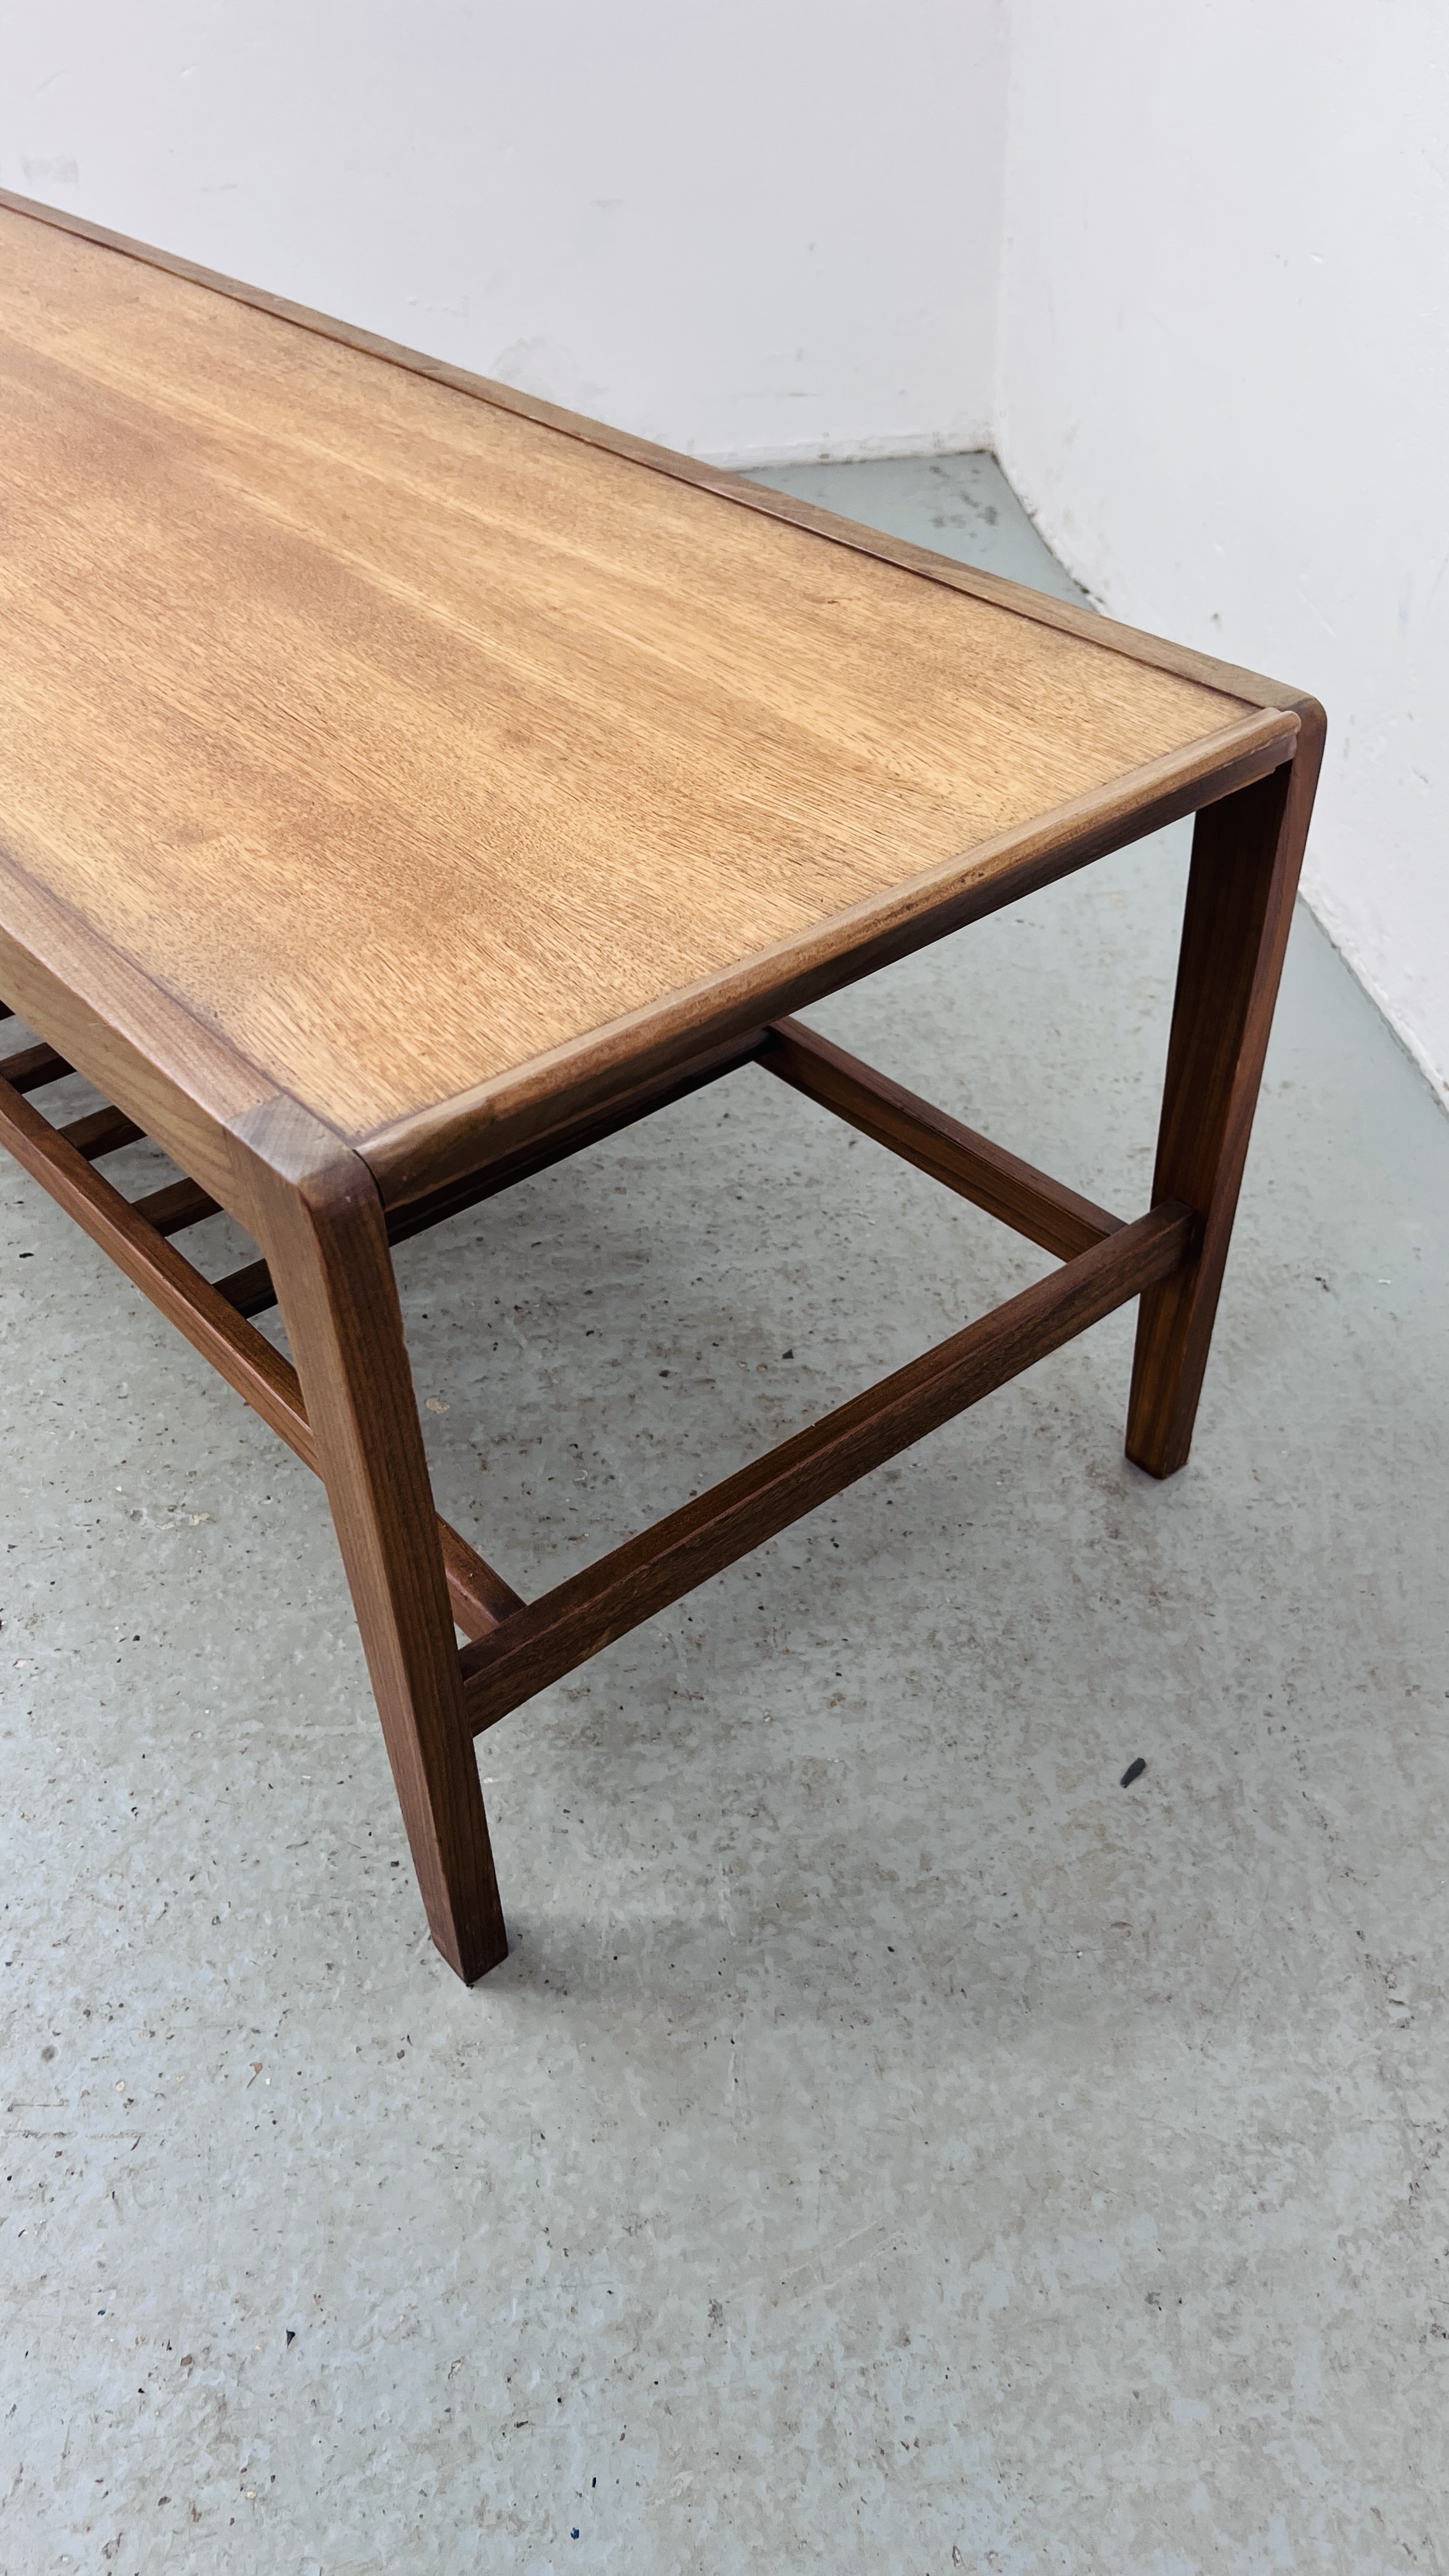 A MID CENTURY REMPLOY TEAK RECTANGULAR COFFEE TABLE WITH SLATTED SHELF BELOW W 44CM, L 125CM, - Image 6 of 7